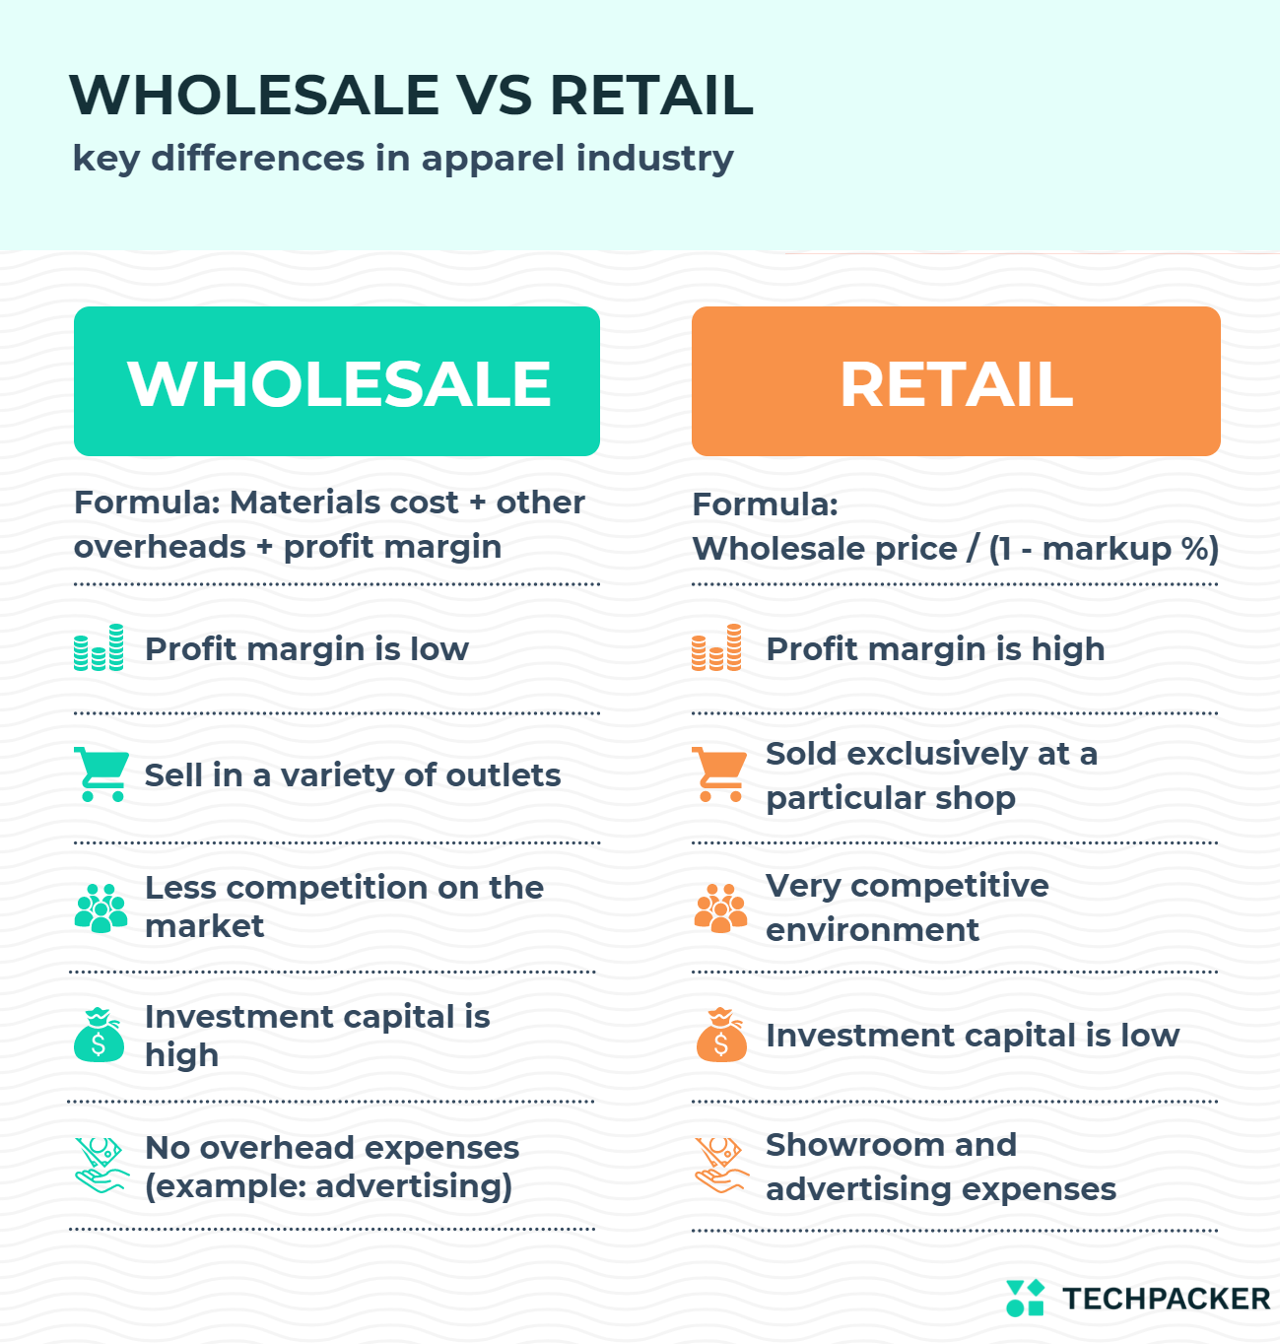 Gambar Difference between Retail and Wholesale In Apparel Industry